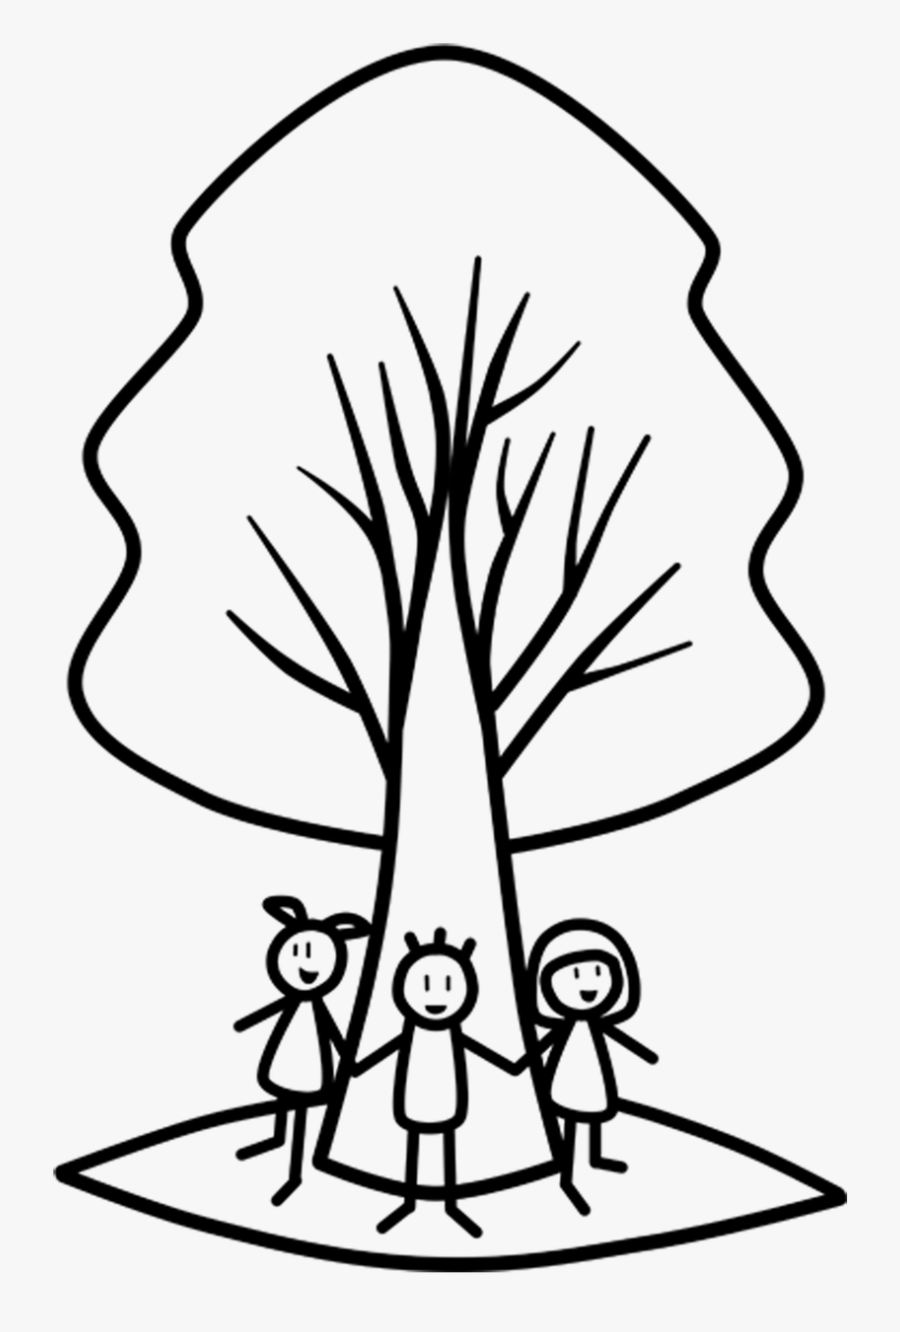 Tree Children Earth Day Free Picture - Gambar Pohon Anak Anak, Transparent Clipart